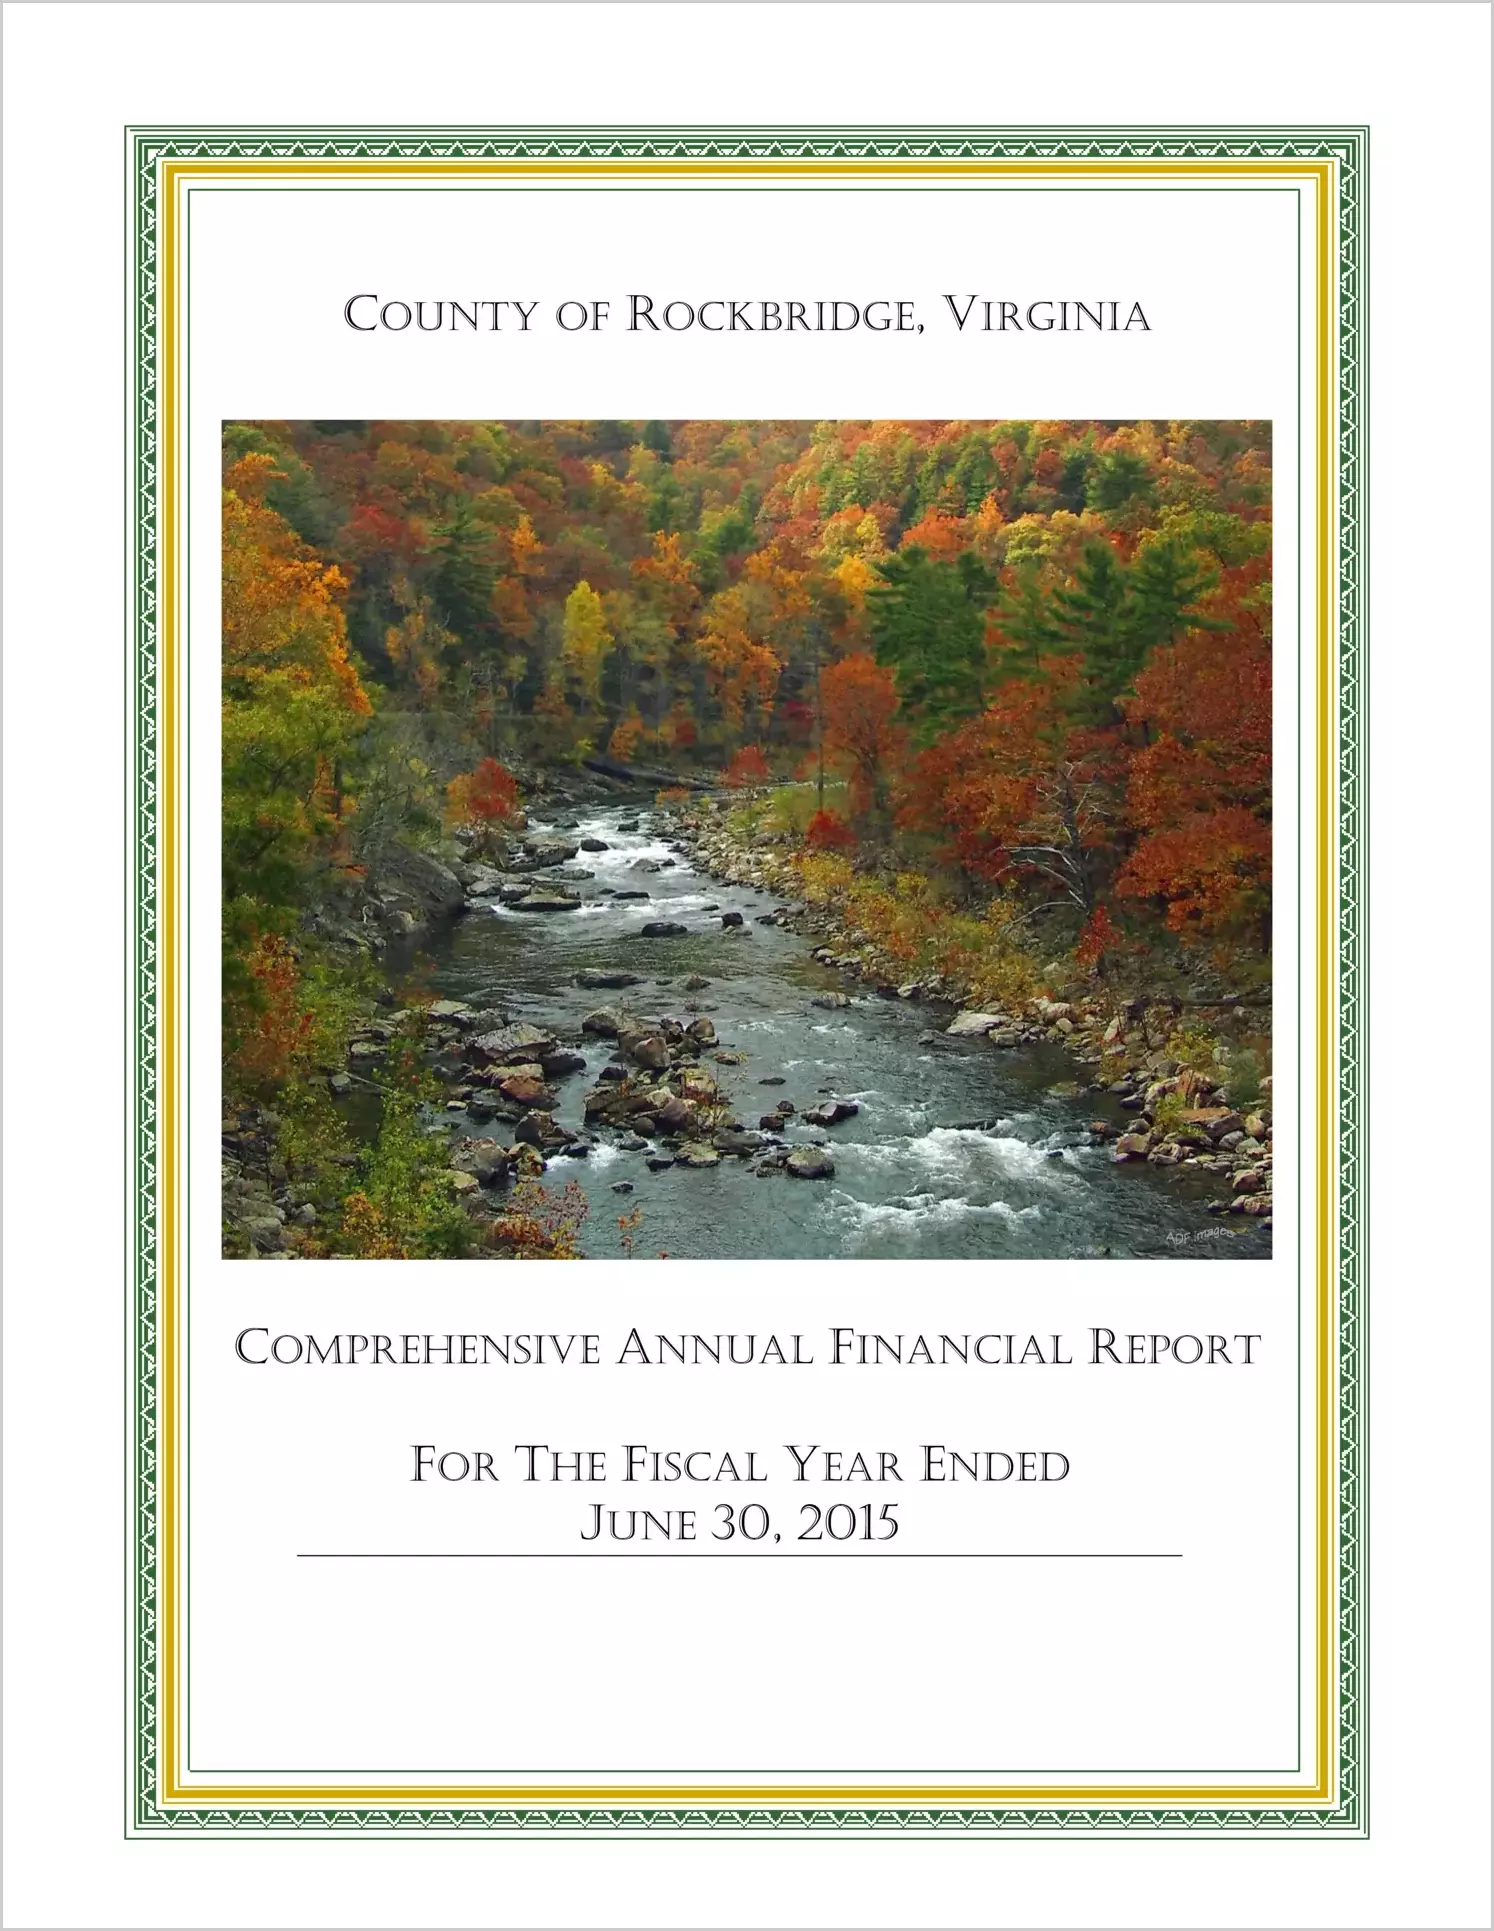 2015 Annual Financial Report for County of Rockbridge